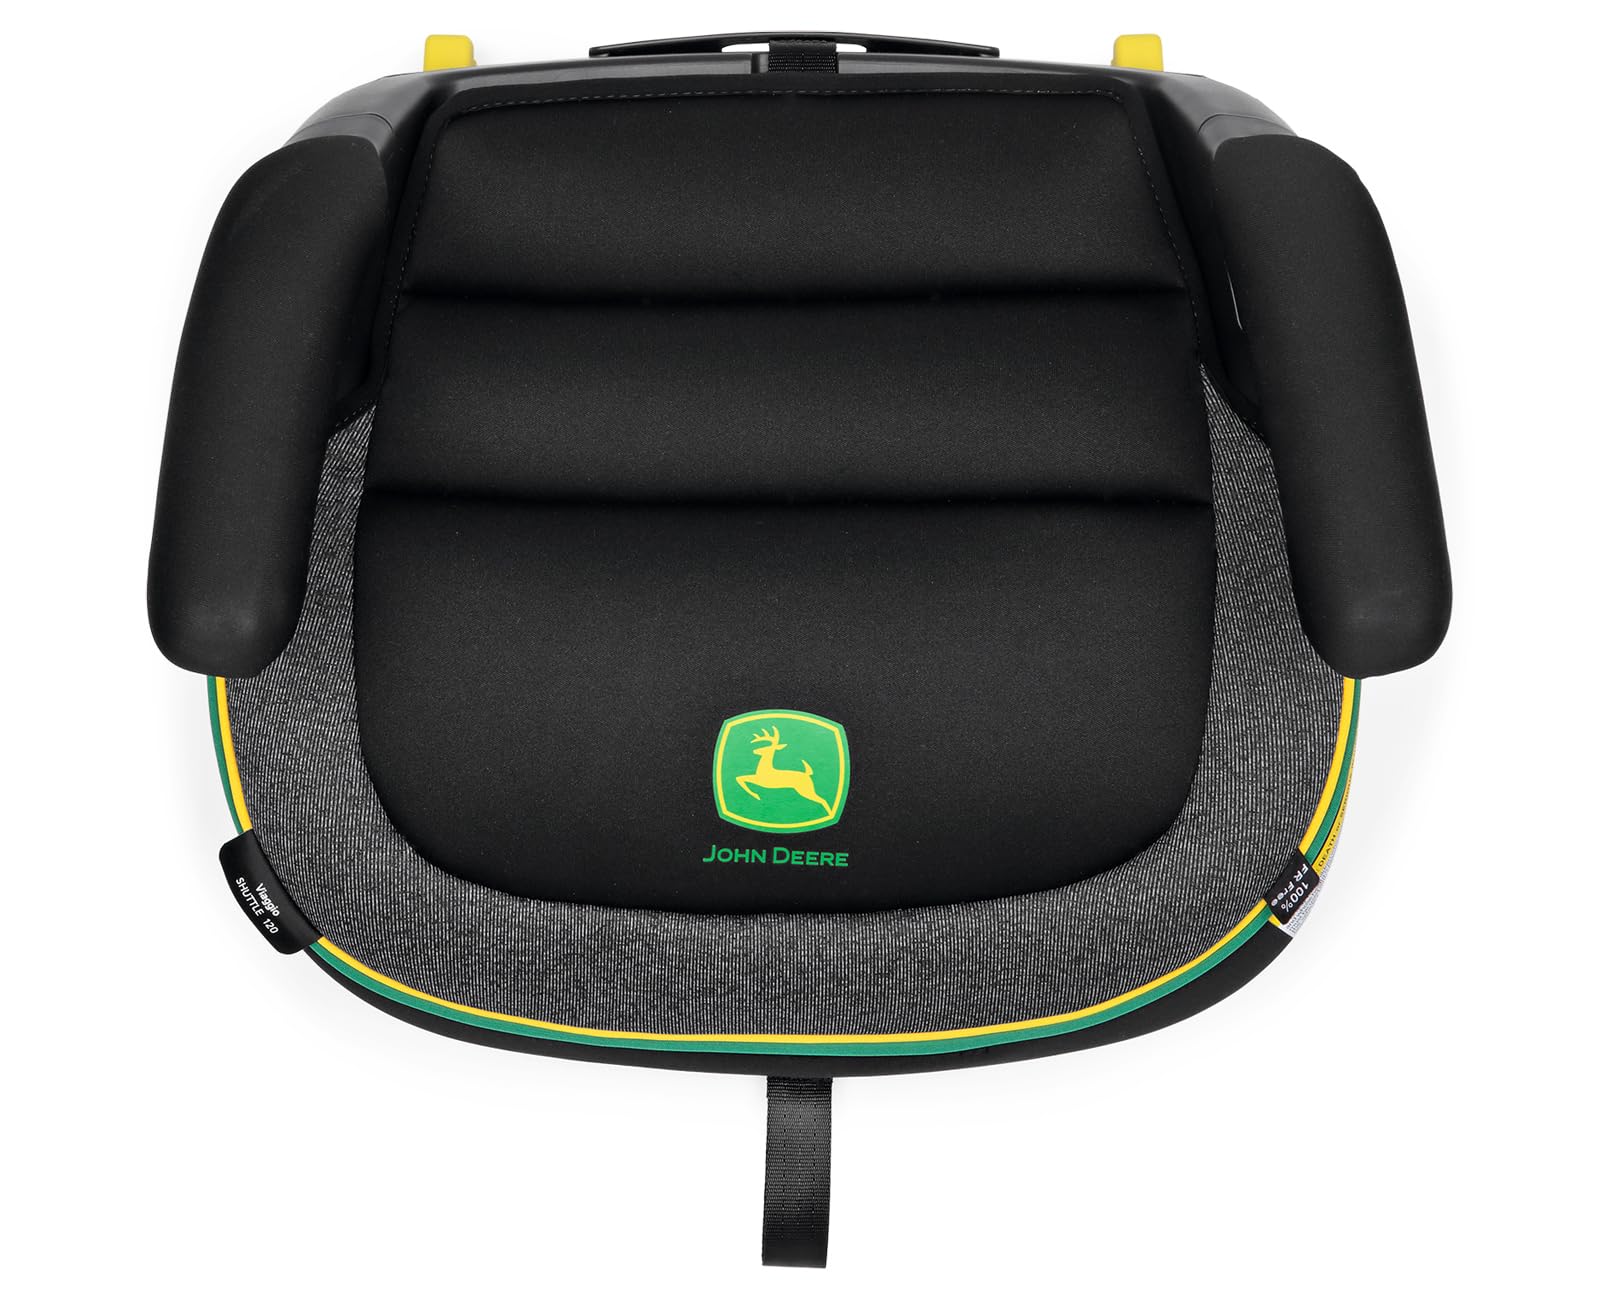 Peg Perego Viaggio Shuttle - Booster Car Seat - for Children from 40 to 120 lbs - Made in Italy - John Deere (Black & Green)